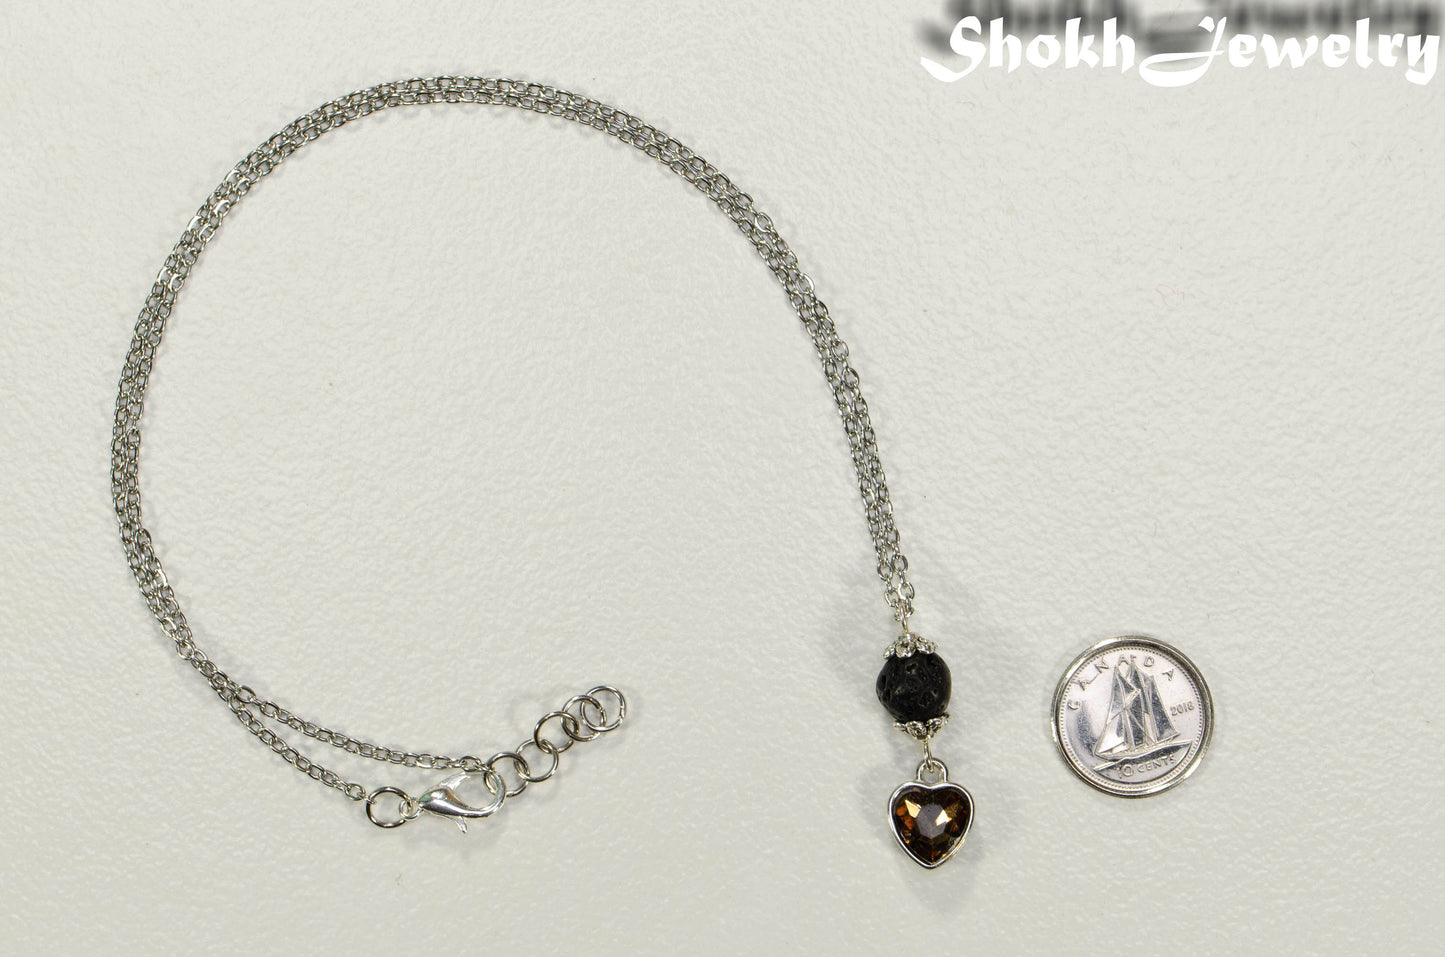 Lava Rock and Heart Shaped November Birthstone Choker Necklace beside a dime.